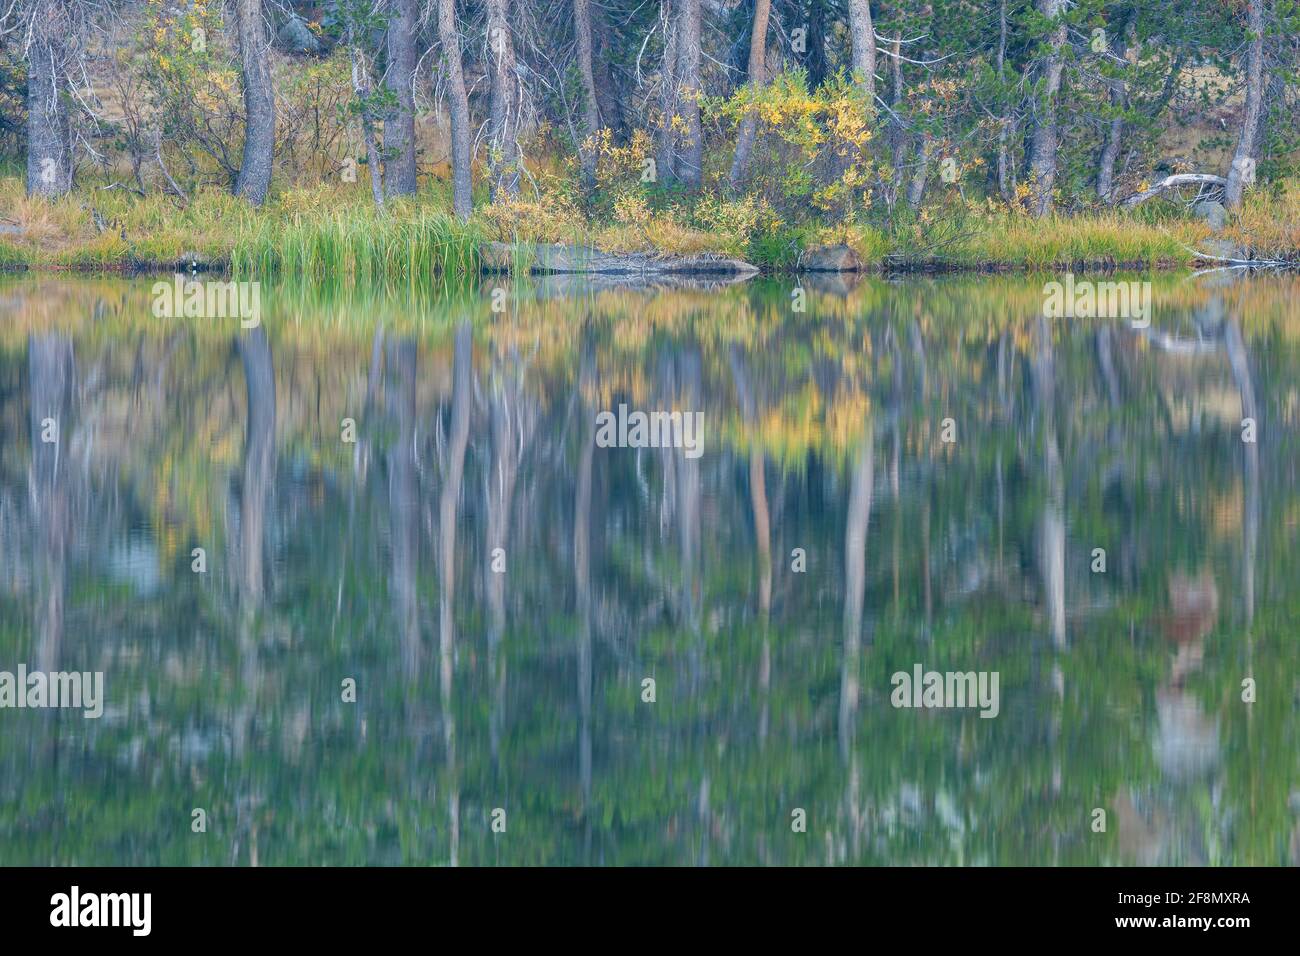 Reflection along the shore of a small pond in autumn at Tioga Pass in the Inyo National Forest near Yosemite National Park, California Stock Photo